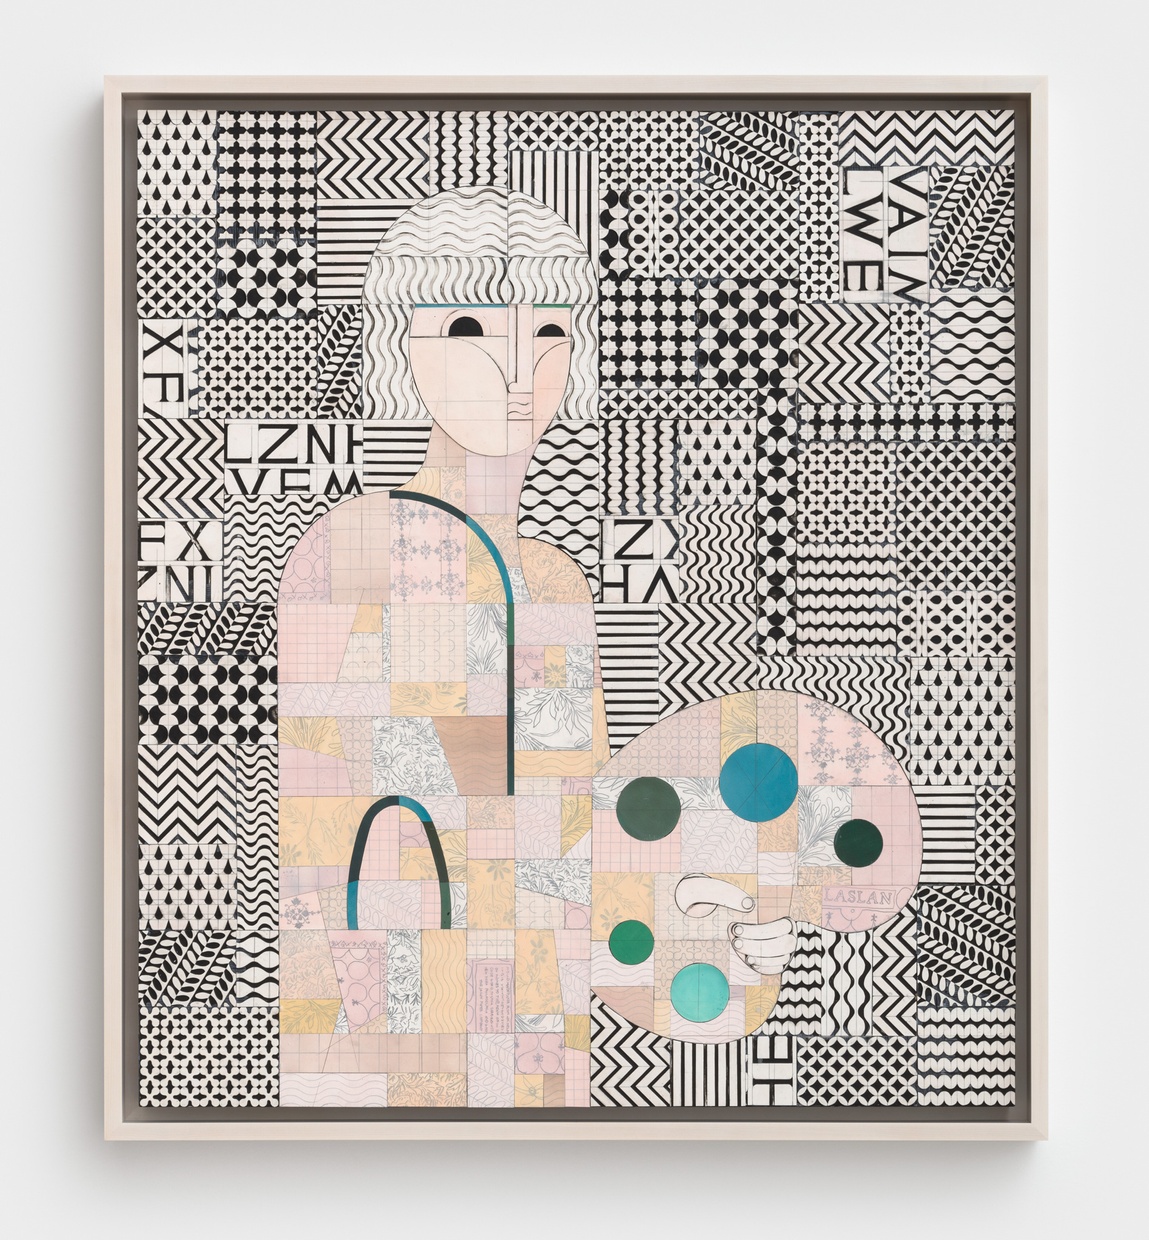 A painting of an abstract figure holding a palette, formed from a grid of pastel shapes against a black and white geometric background.